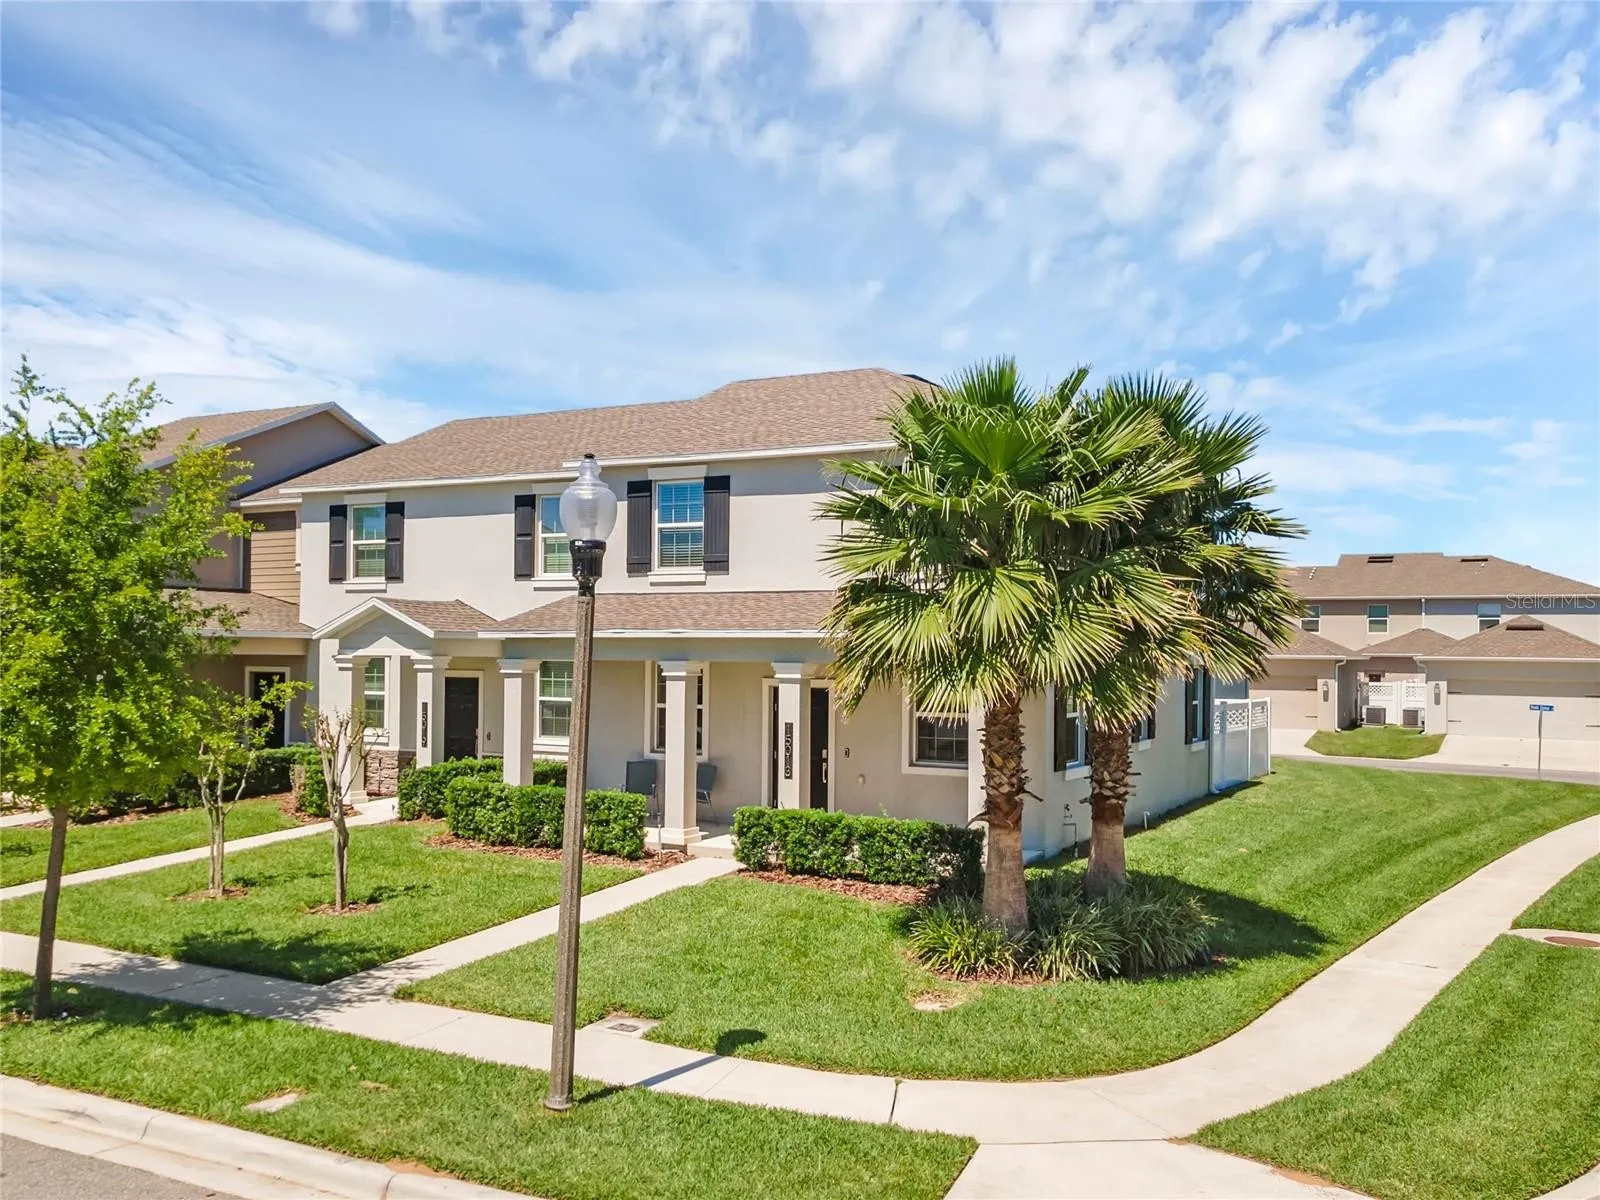 Ken Pozek Group agent Lindsay Chancellor assisted a client with finding their new home at 15013 Book Club Road in Winter Garden, closing at $445,500 on 5/15/2024.